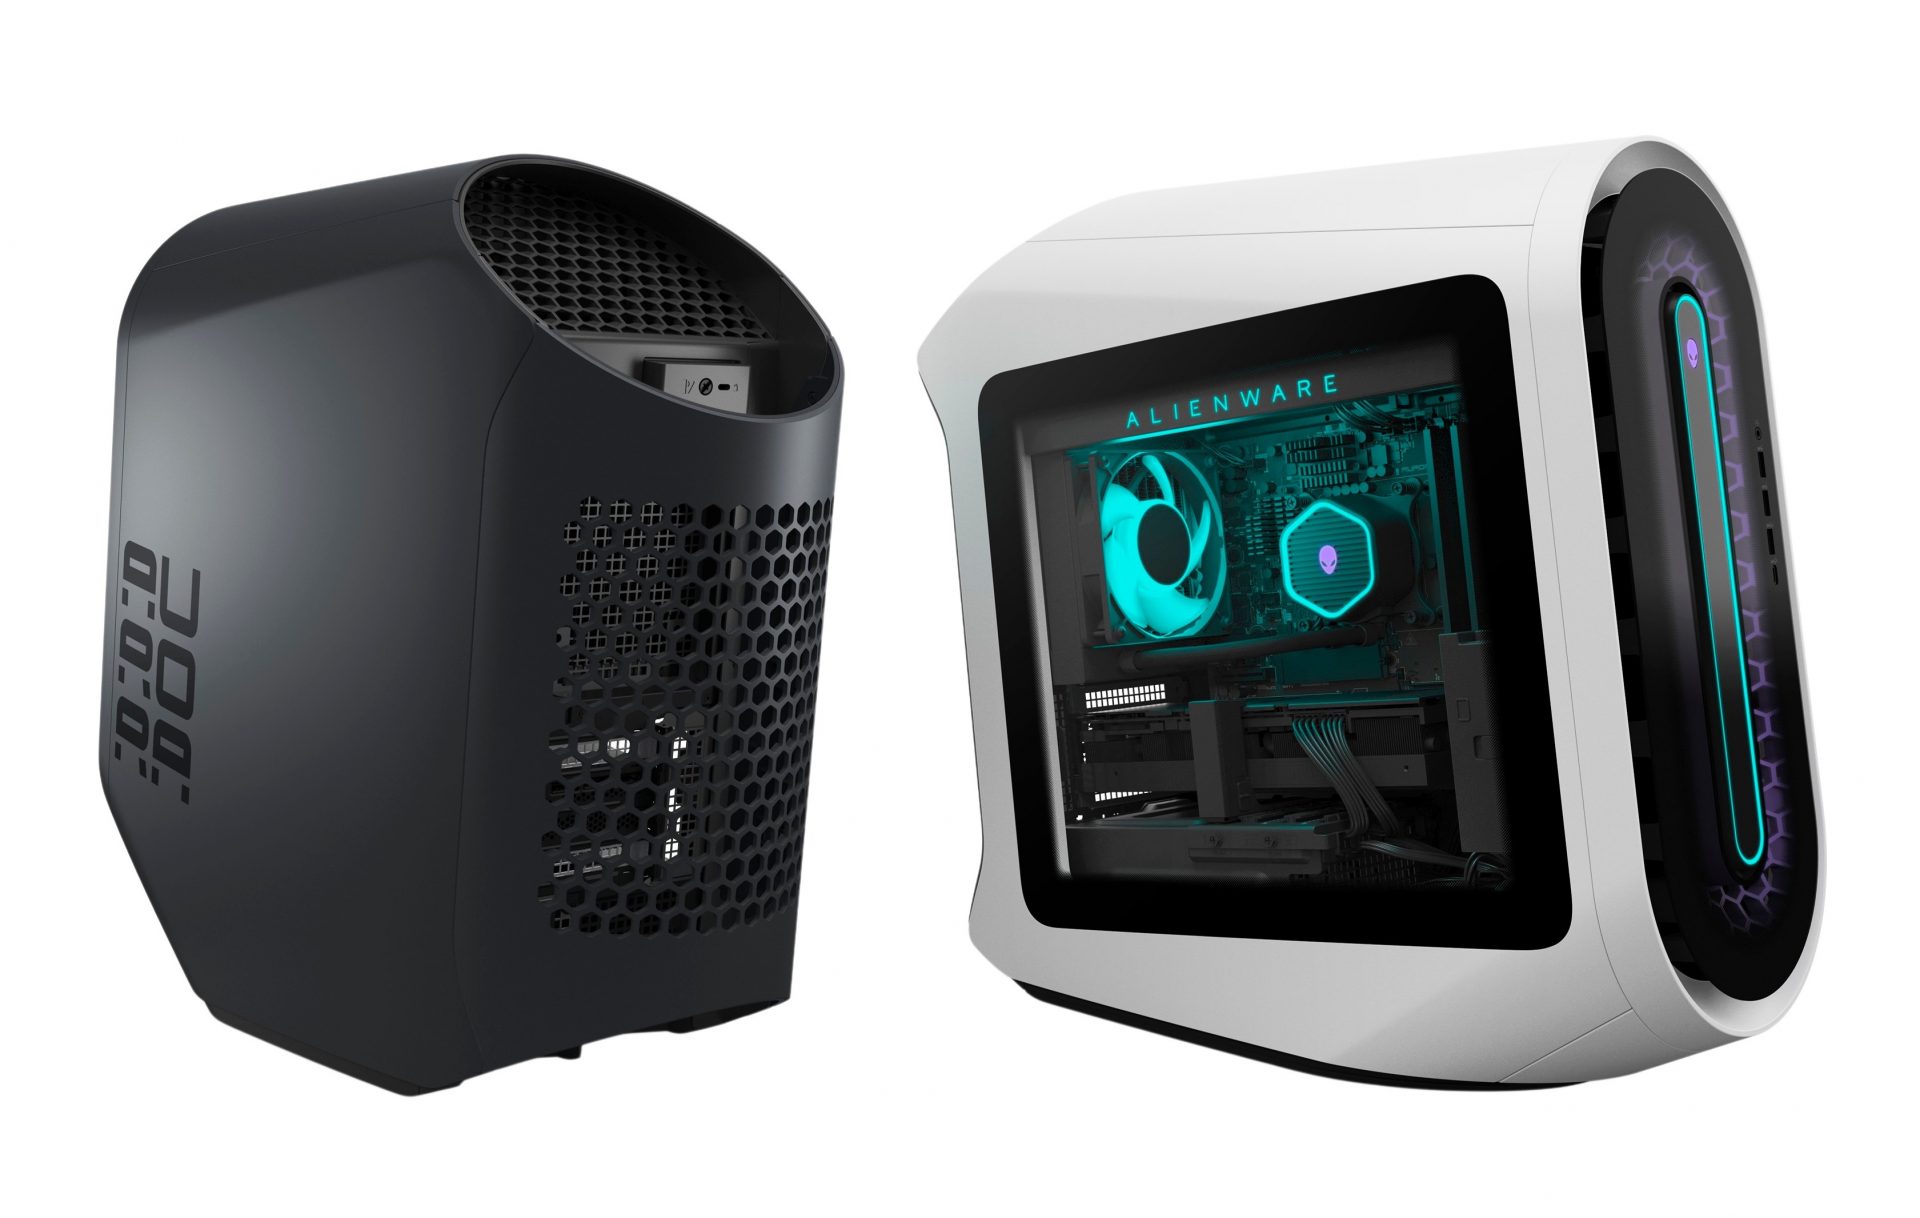 Alienware celebrates its twenty fifth birthday with a redesigned flagship gaming desktop